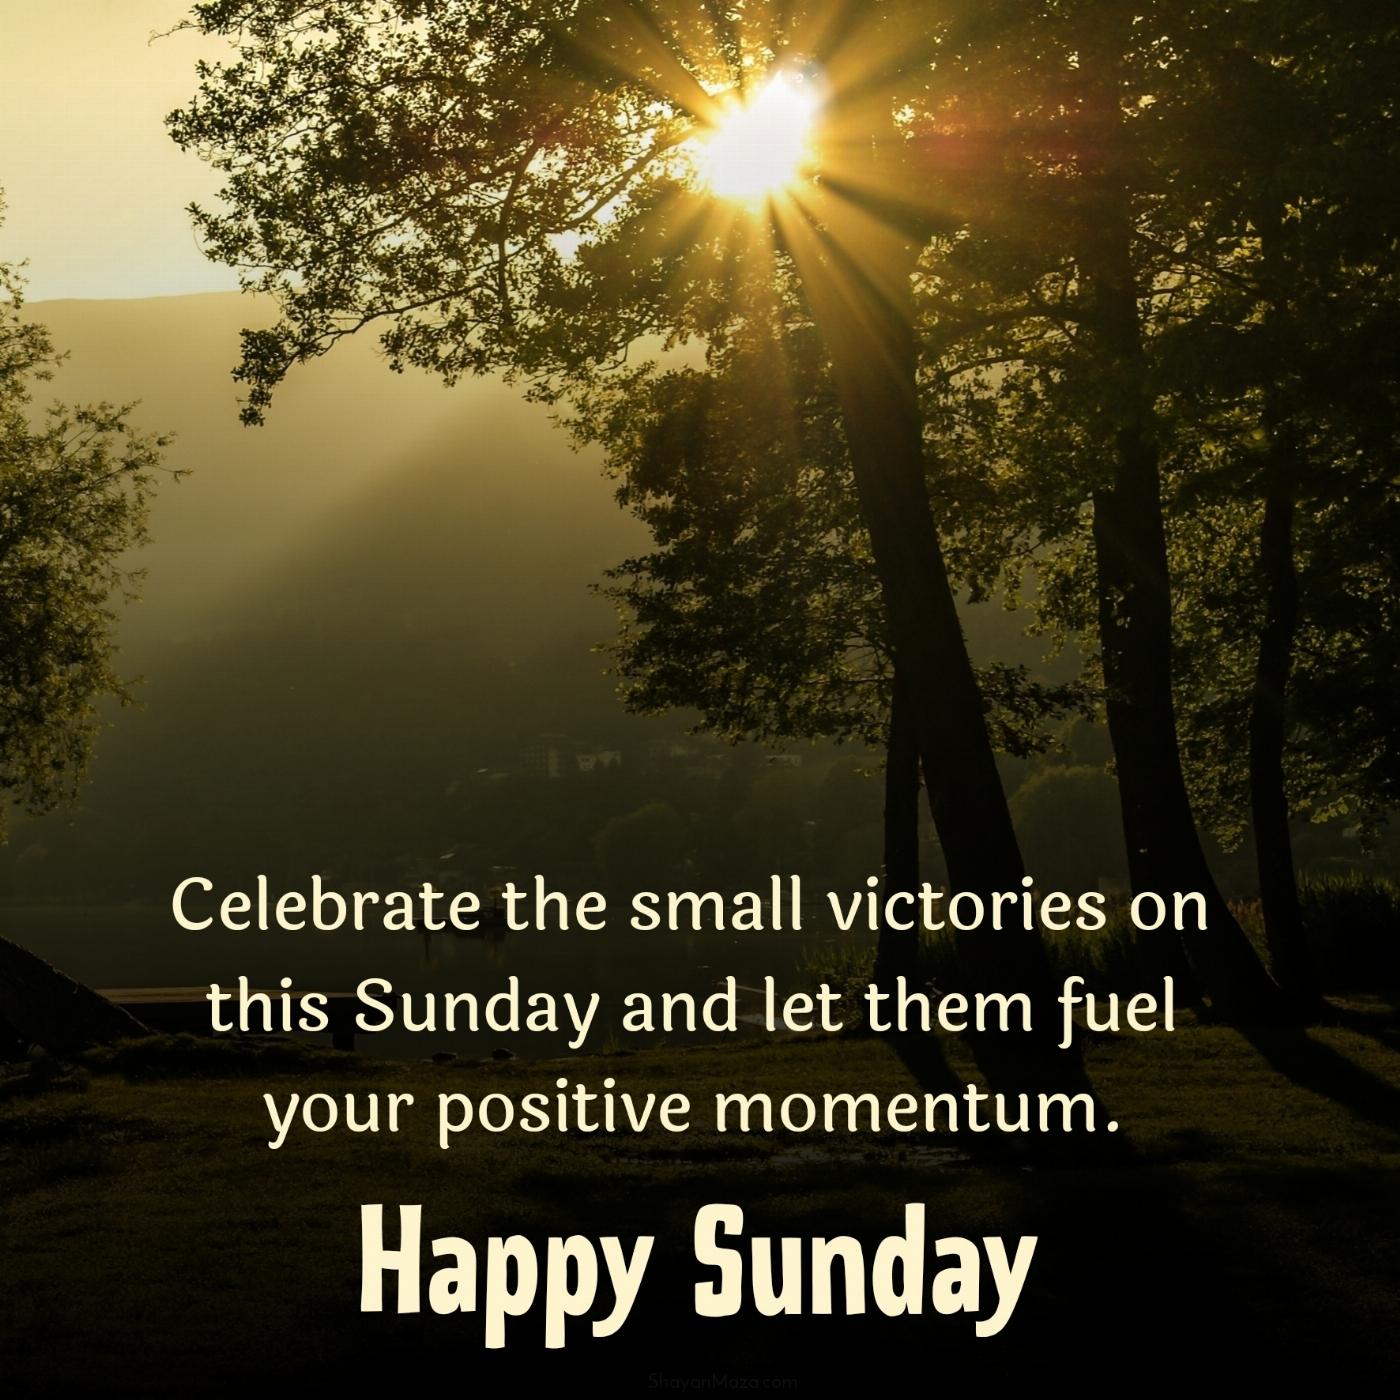 Celebrate the small victories on this Sunday and let them fuel